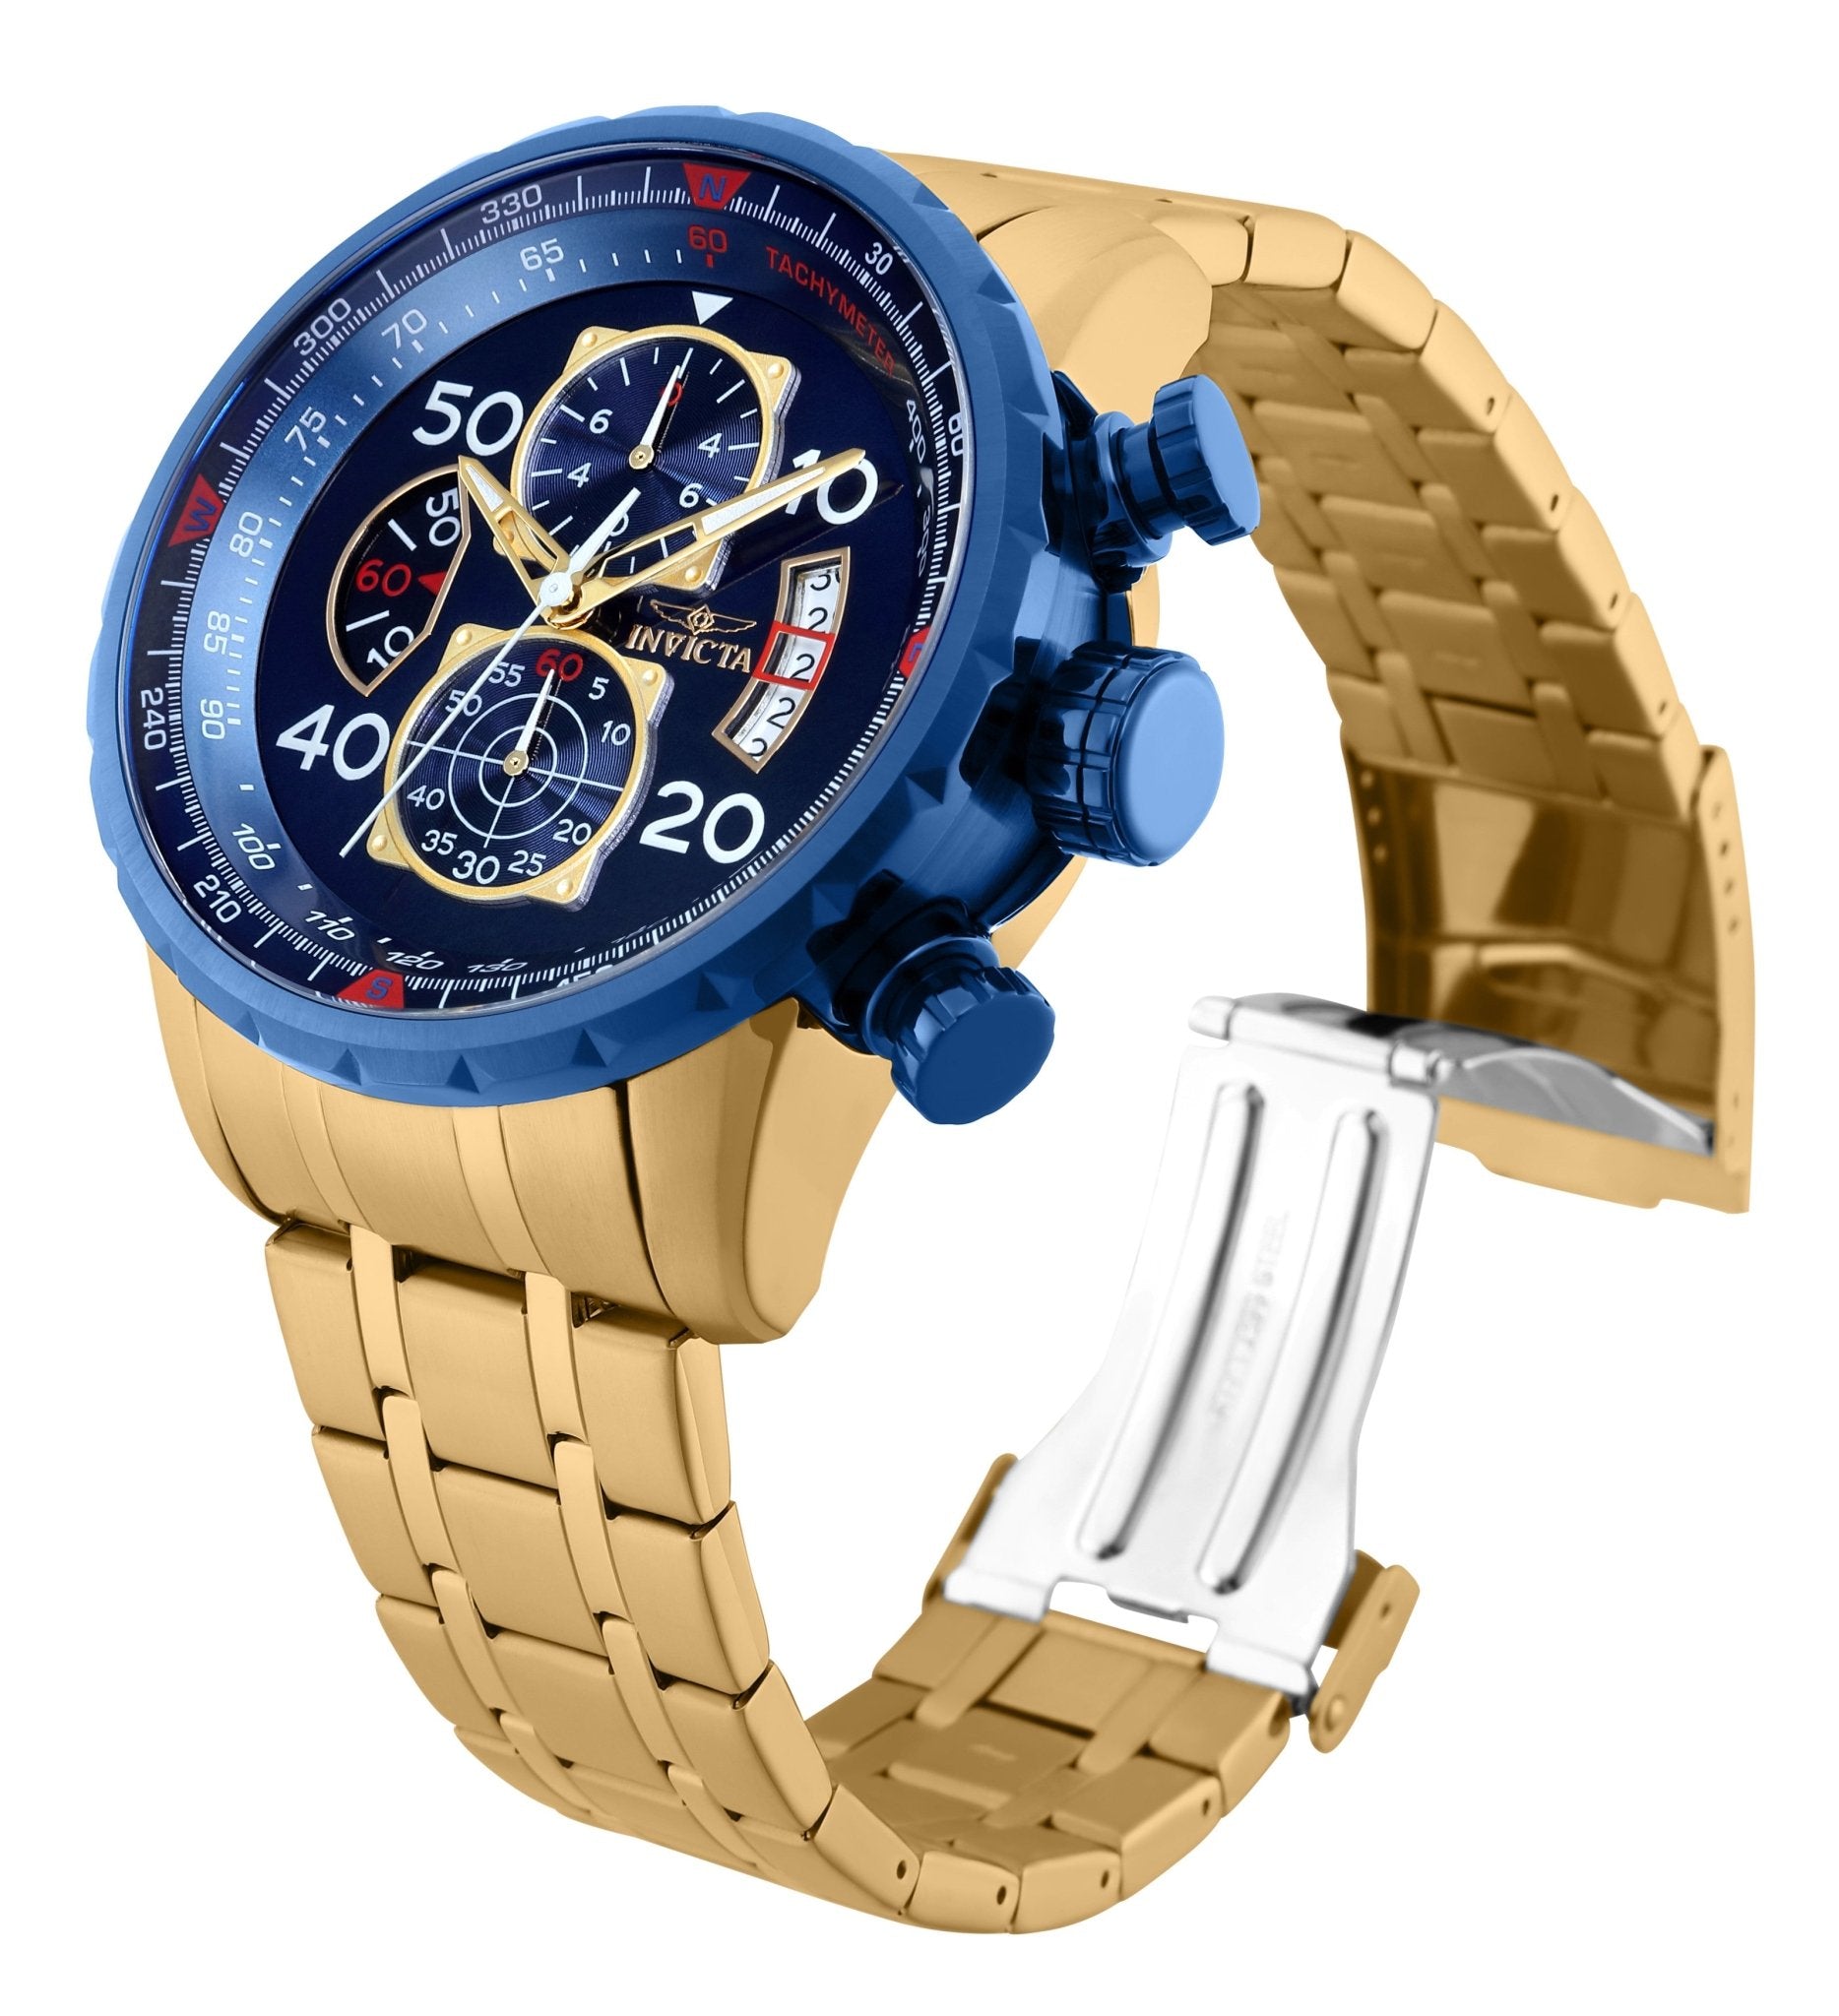 Detailed view of the Invicta Aviator 19173 with blue dial and gold accents